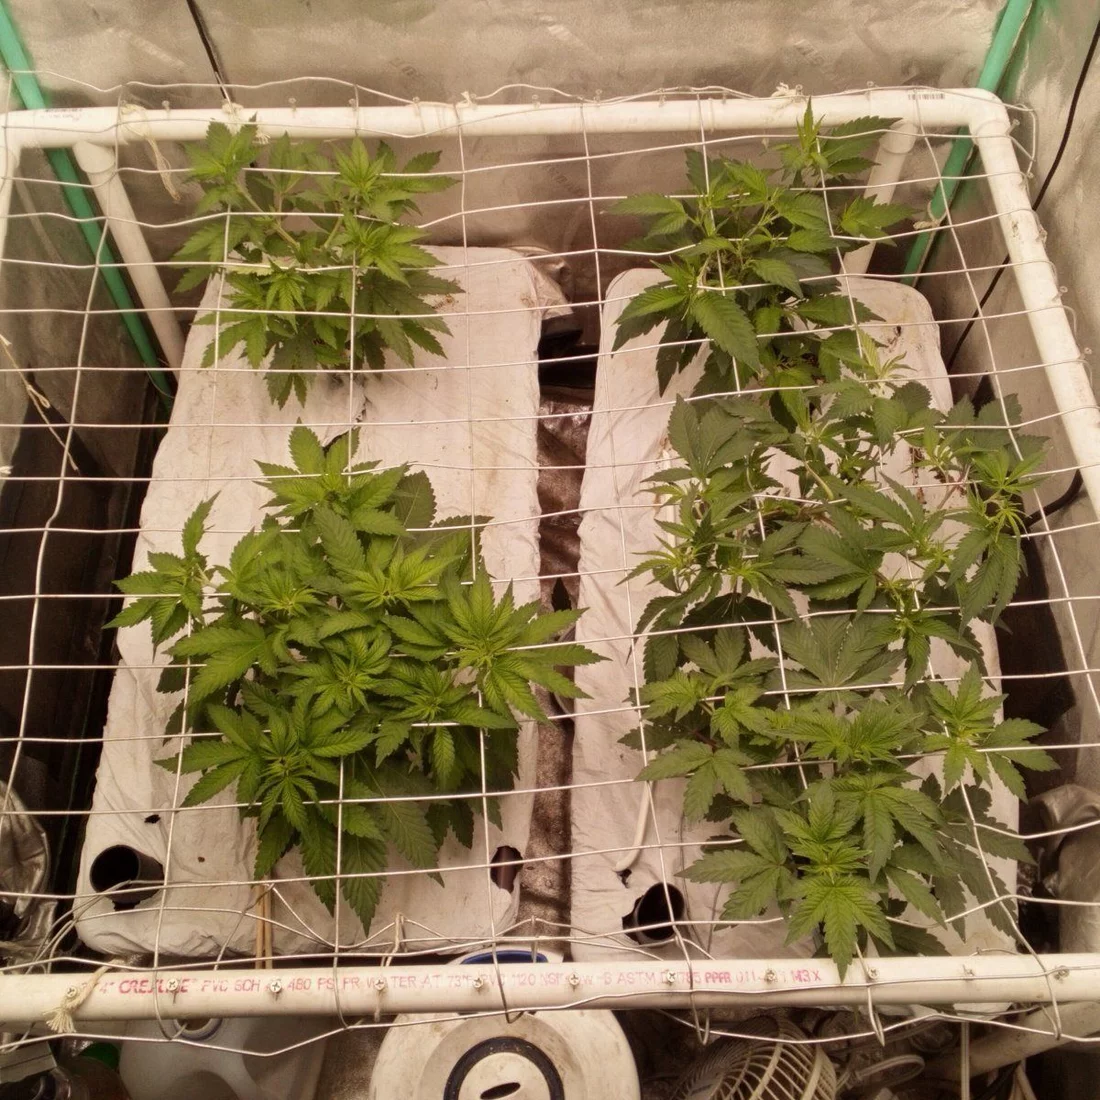 5th cycle no till earthbox 2